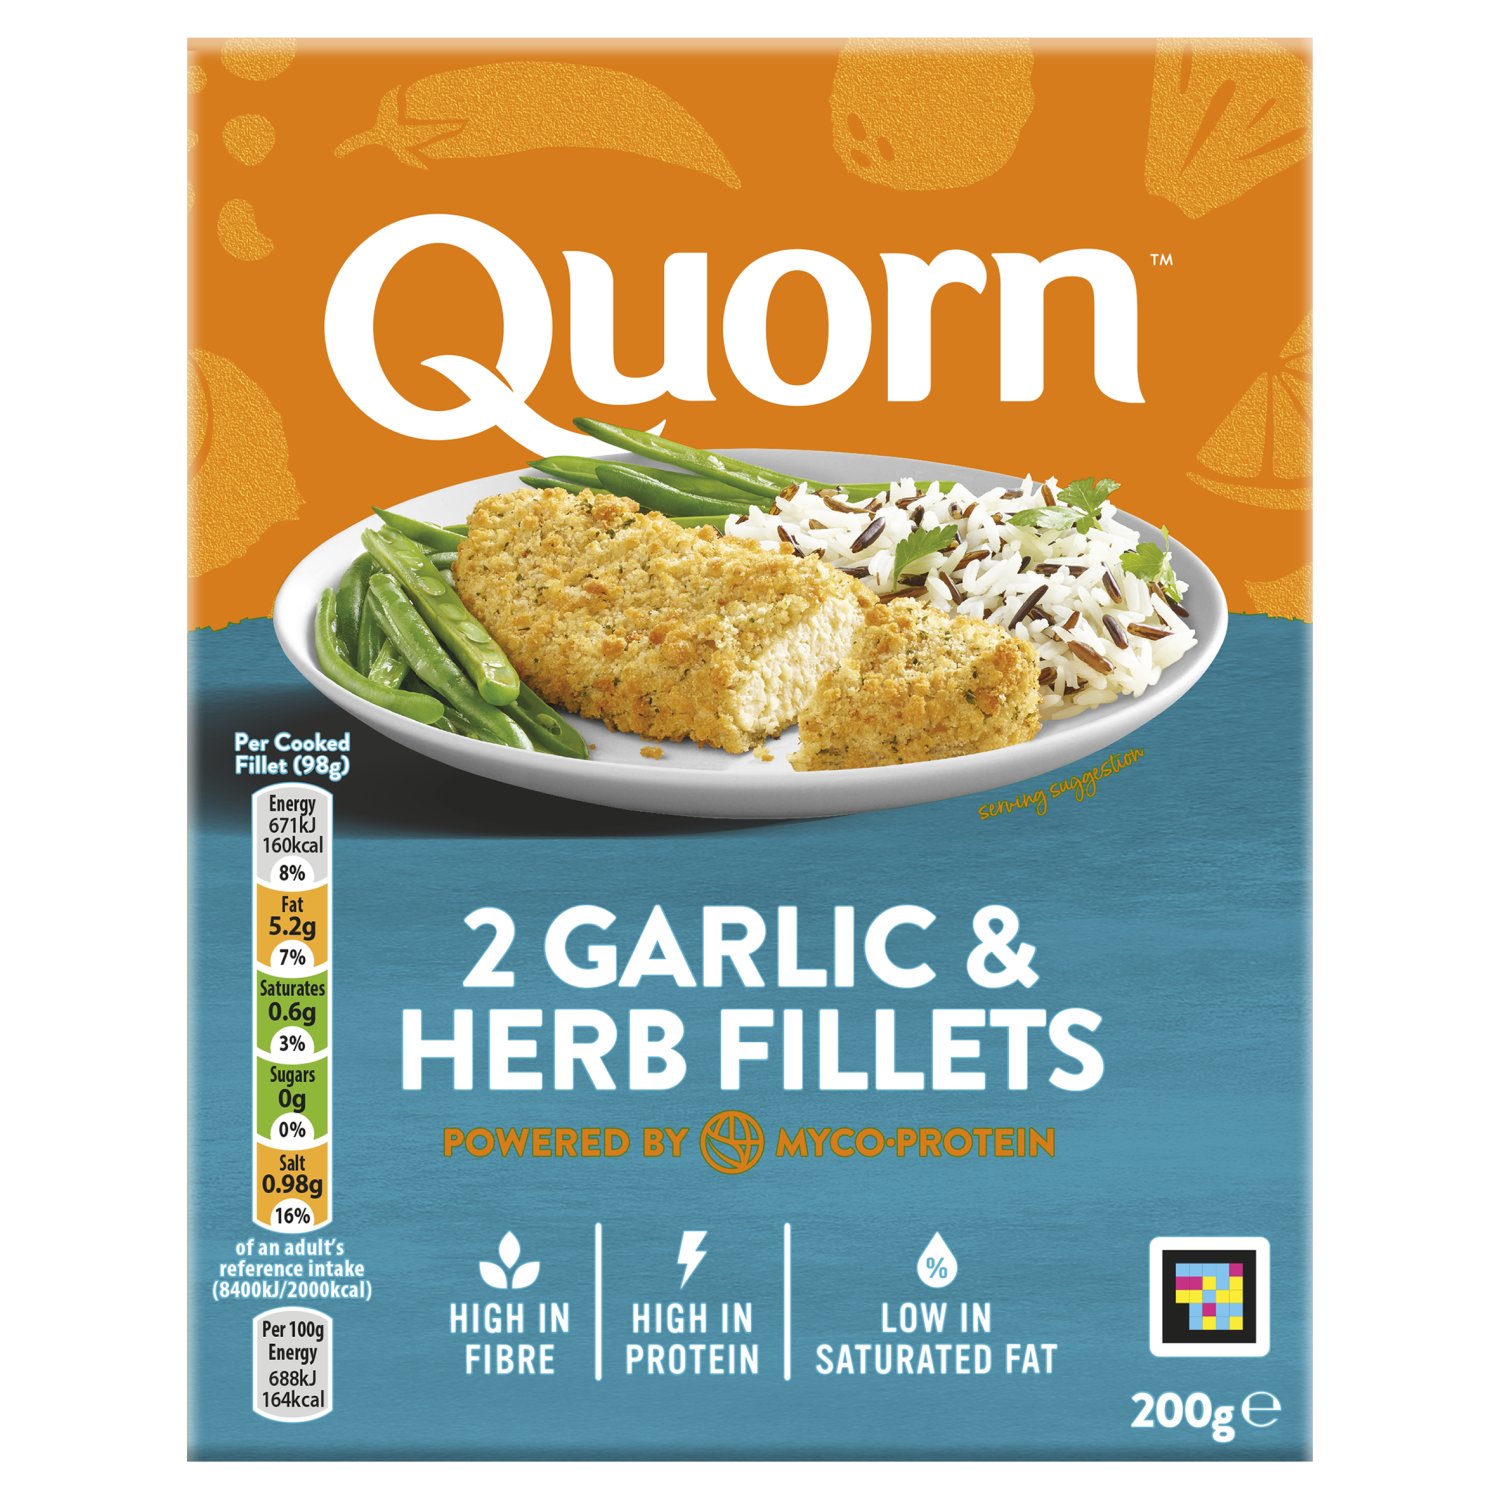 Quorn® and the Quorn™ logo are trademarks belonging to Marlow foods Ltd.